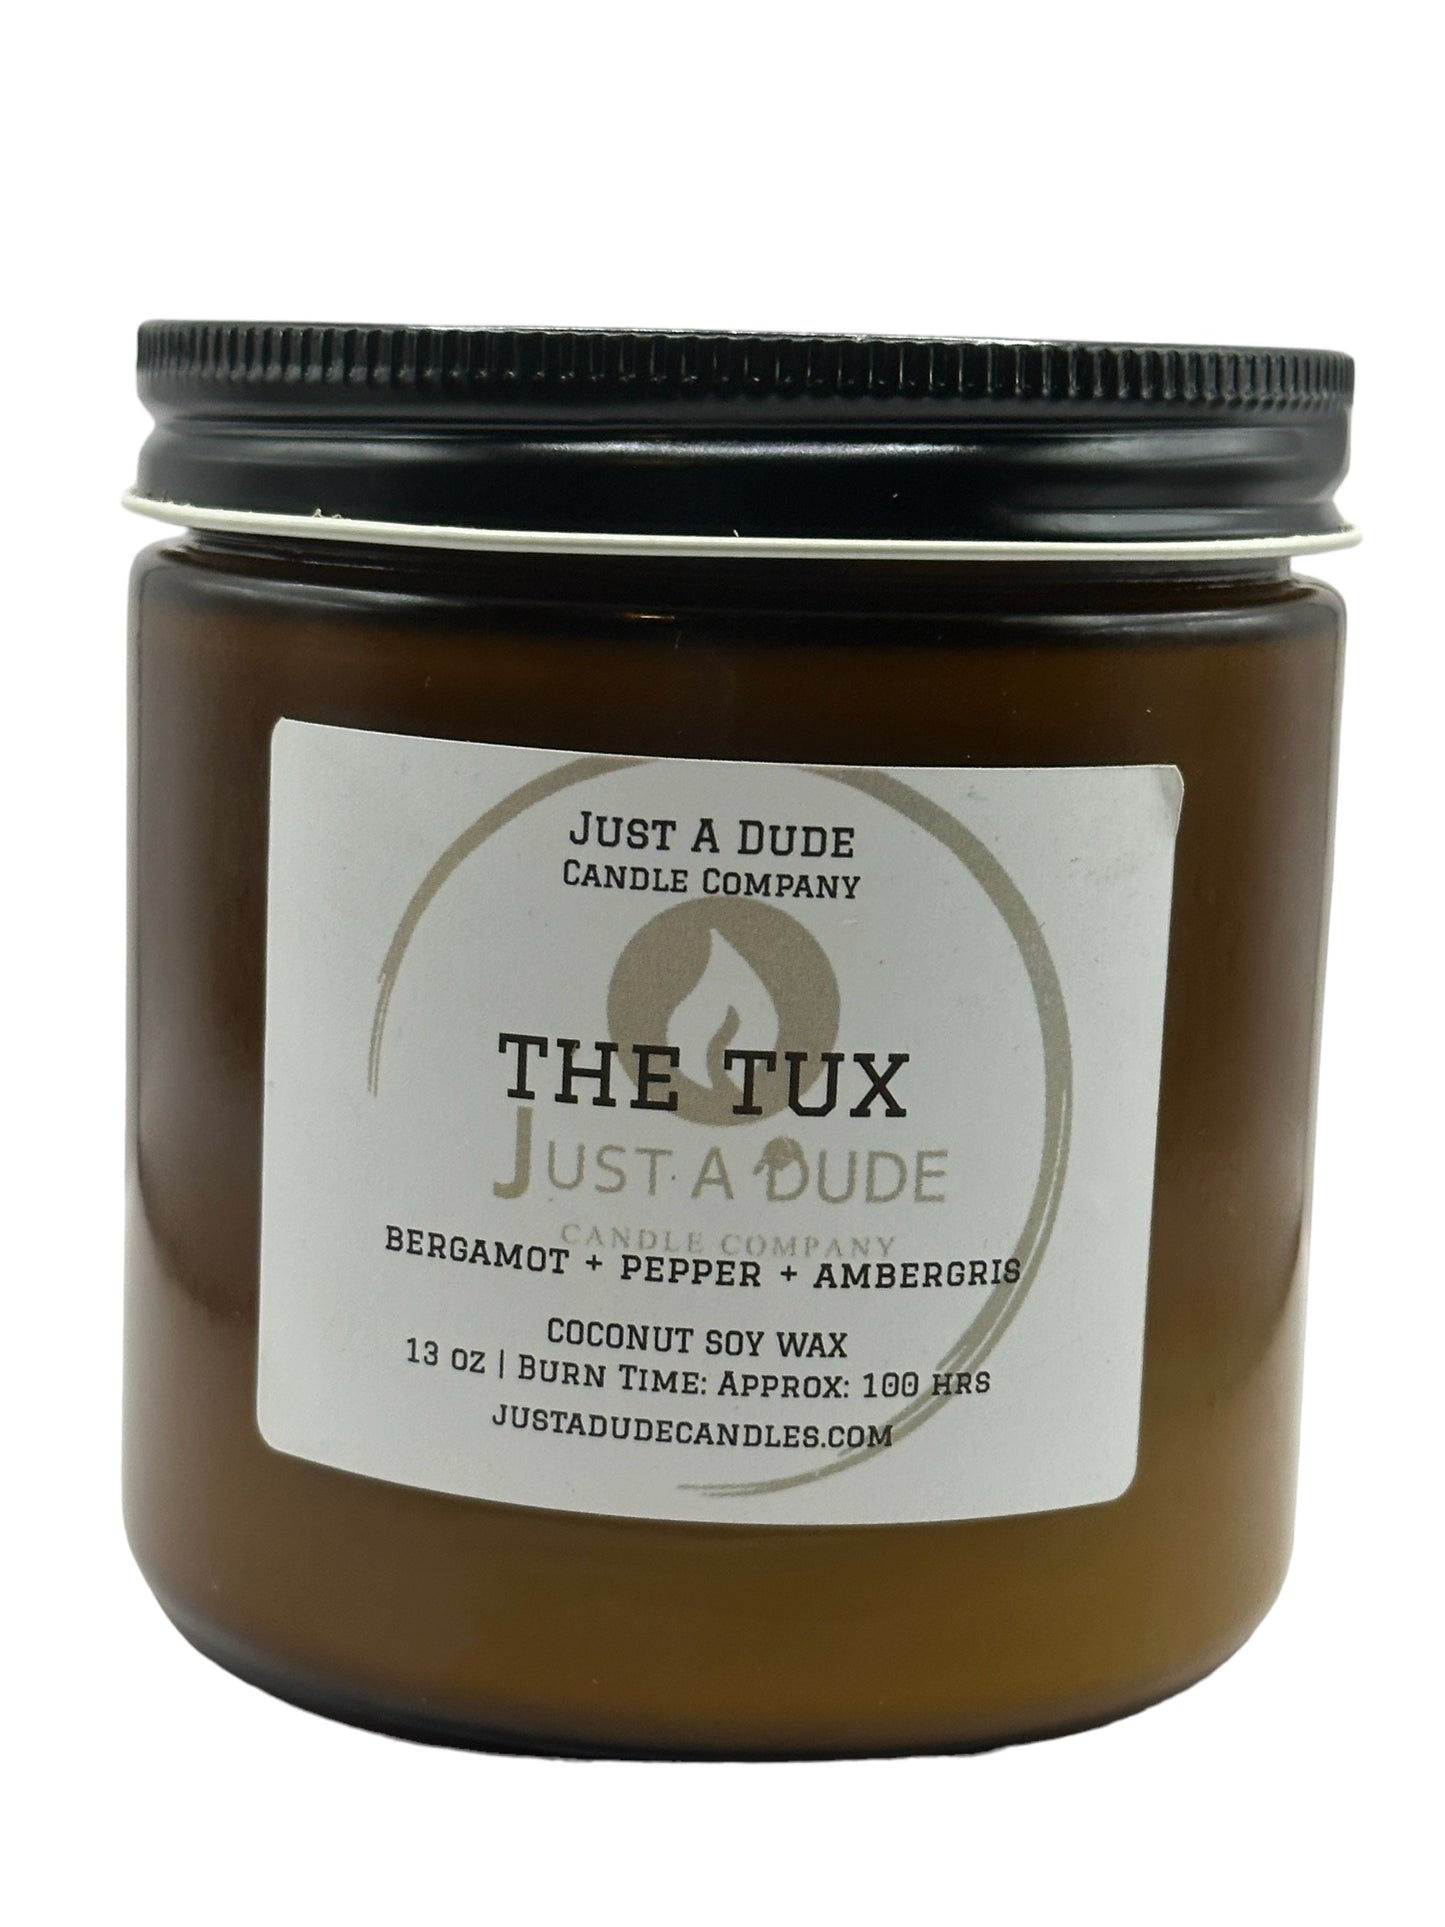 THE TUX  (BERGAMOT + PEPPER + AMBERGRIS) AMBER JAR COLLECTION-JUST A DUDE SIGNATURE CANDLE